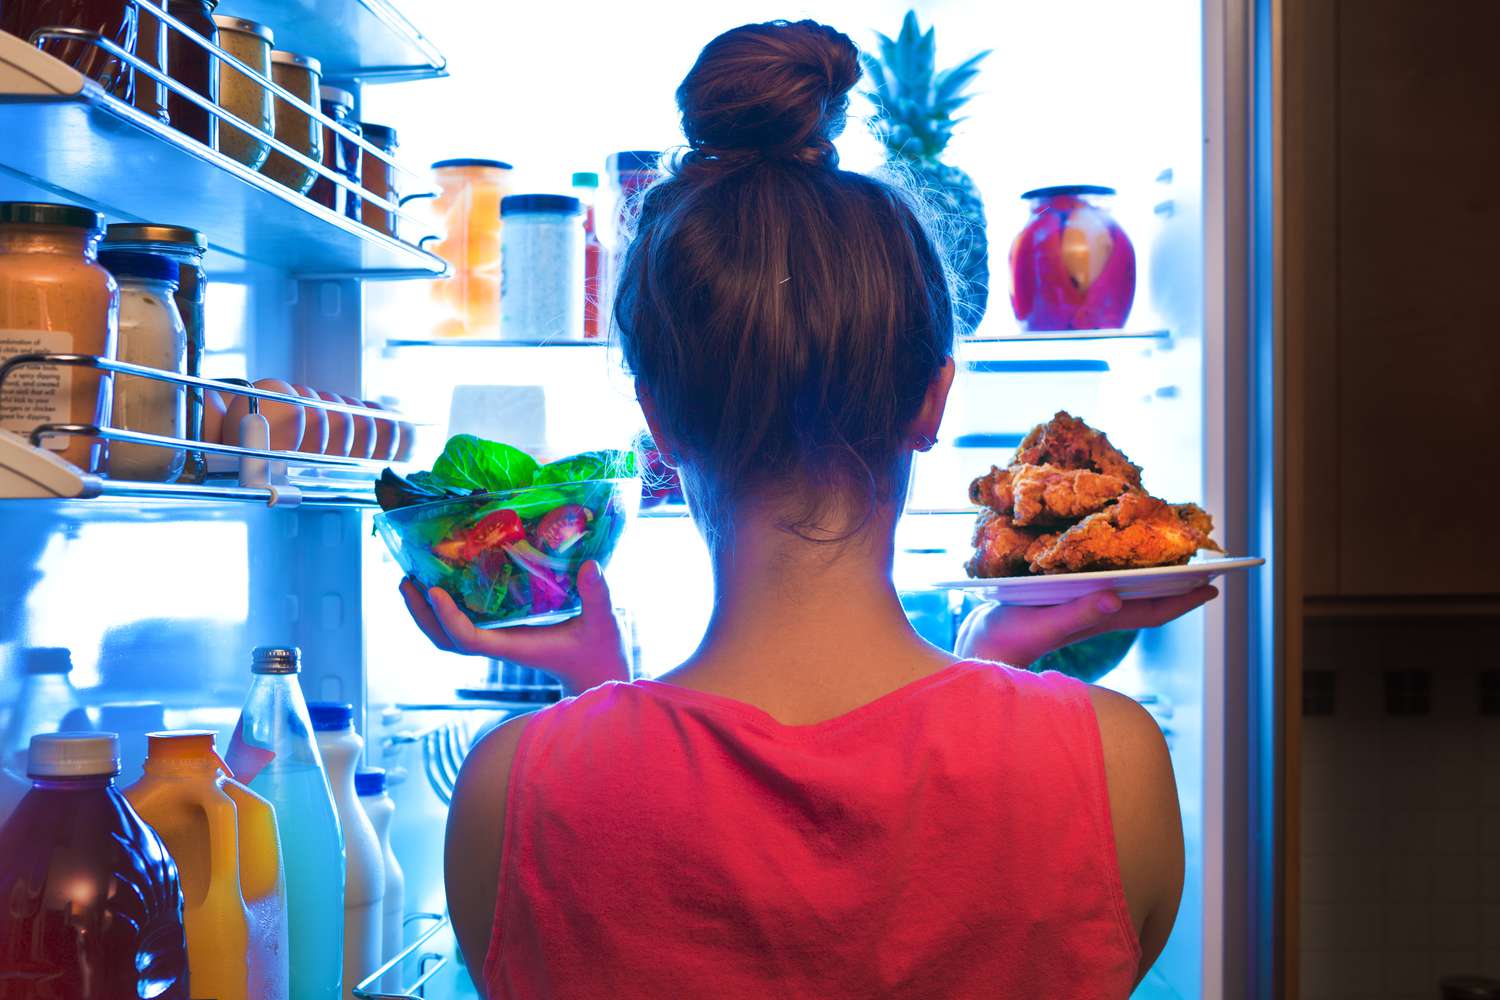 Woman pulling unwrapped food from the fridge.